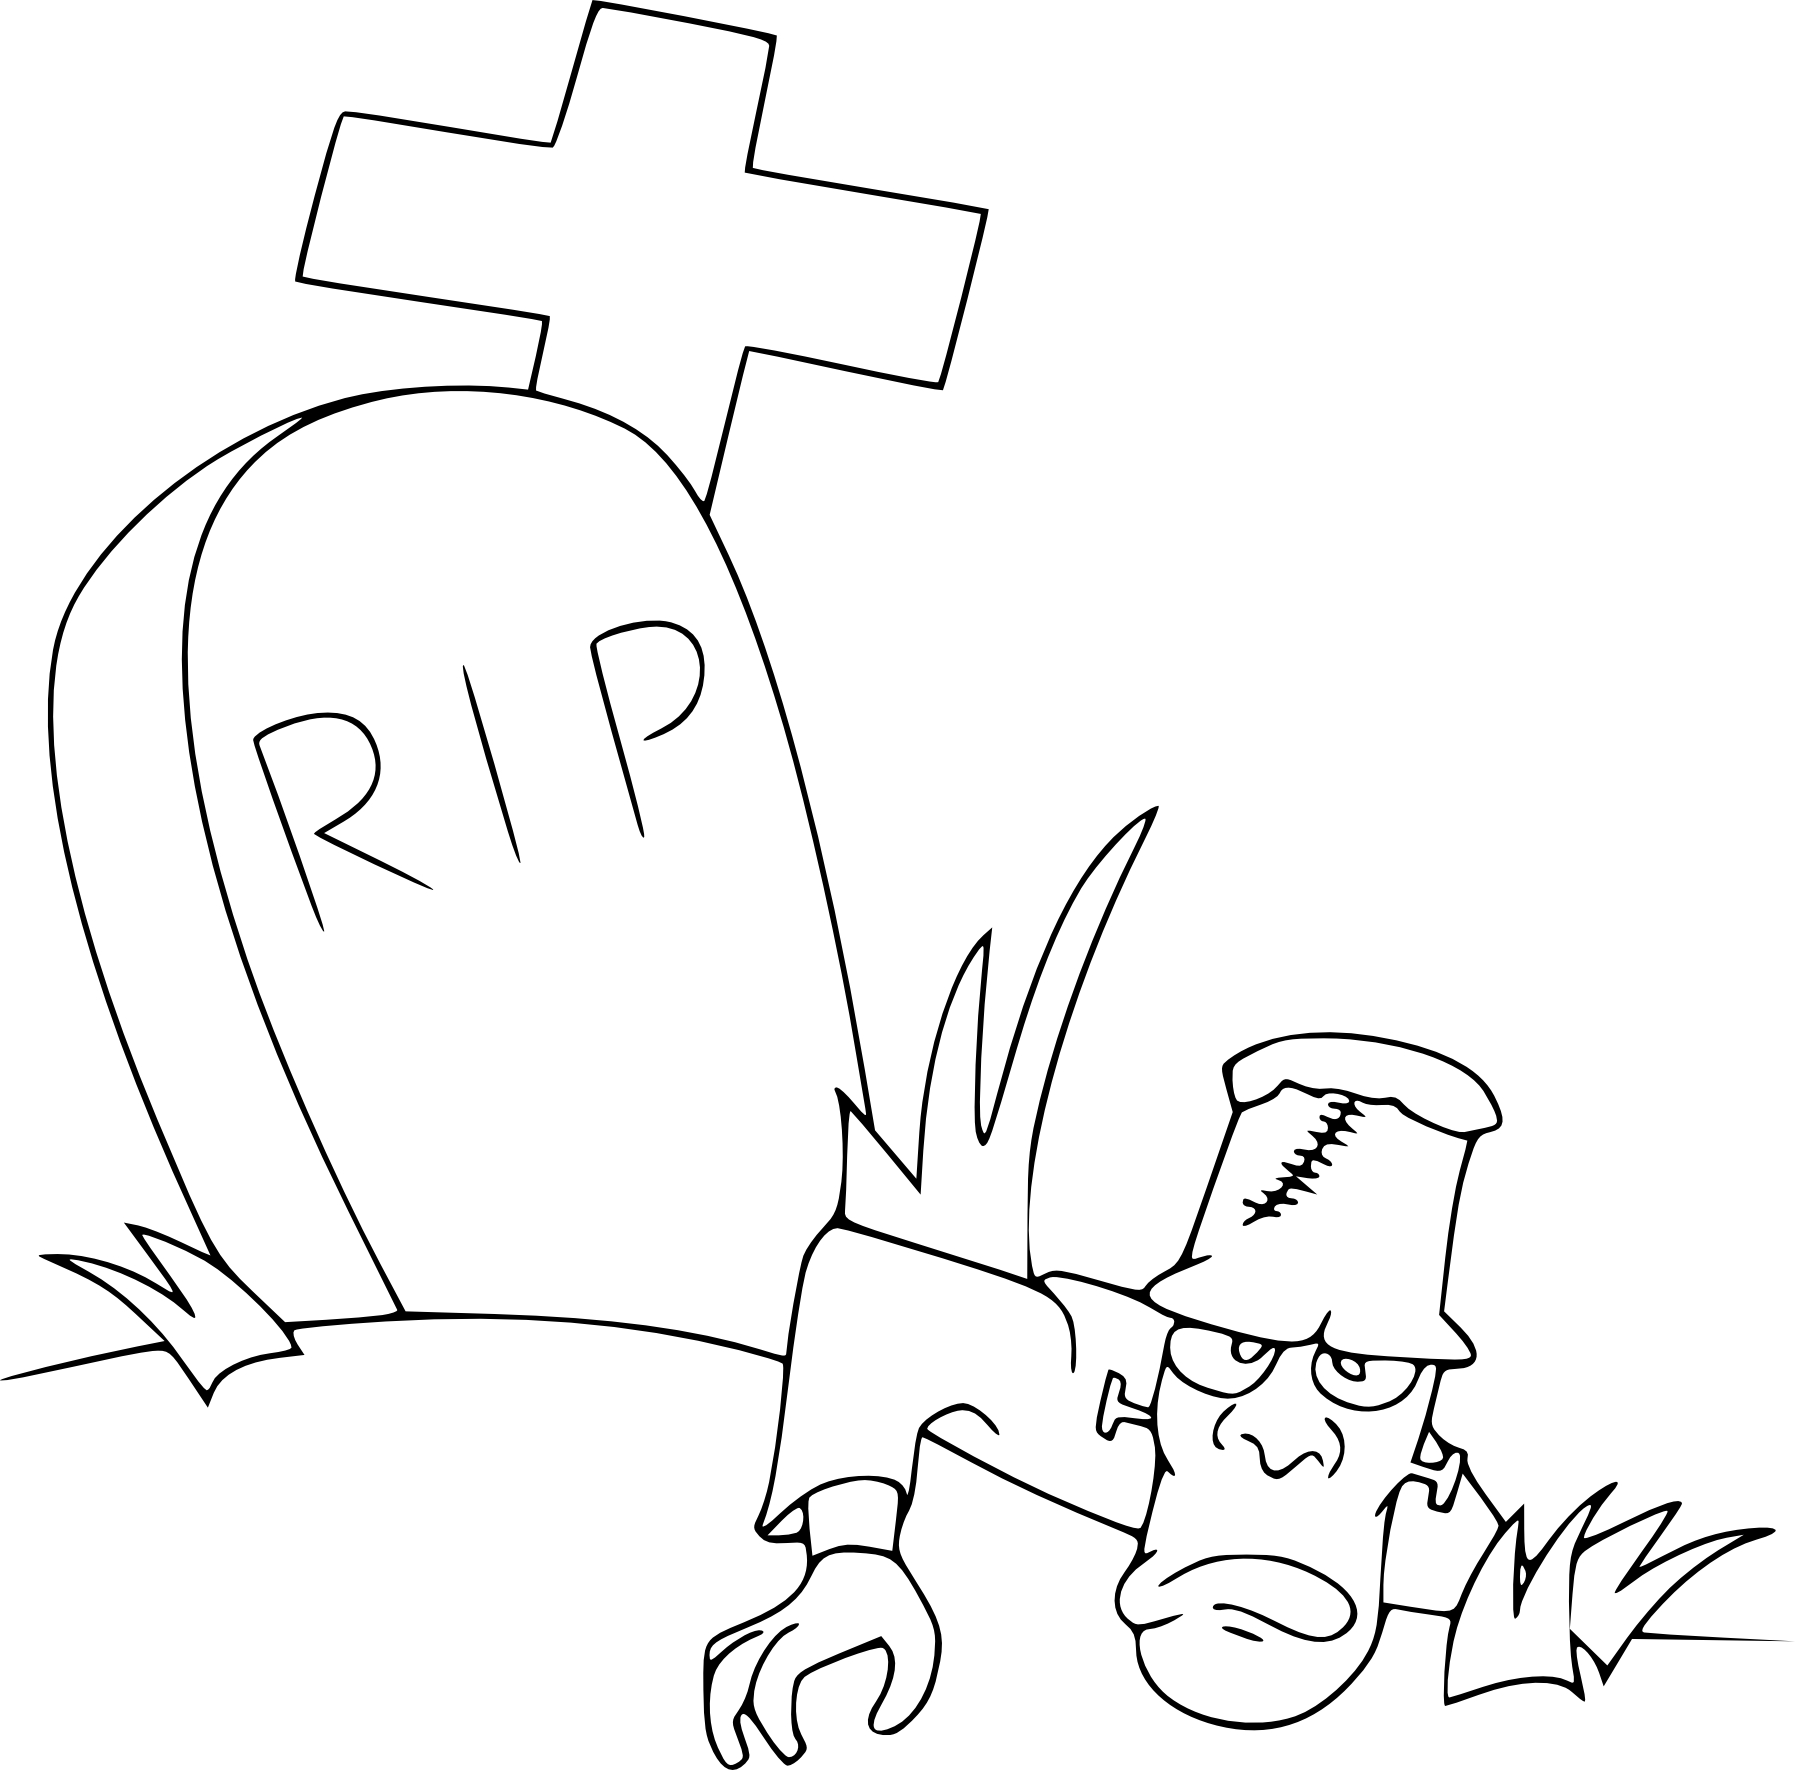 Dead In A Grave coloring page